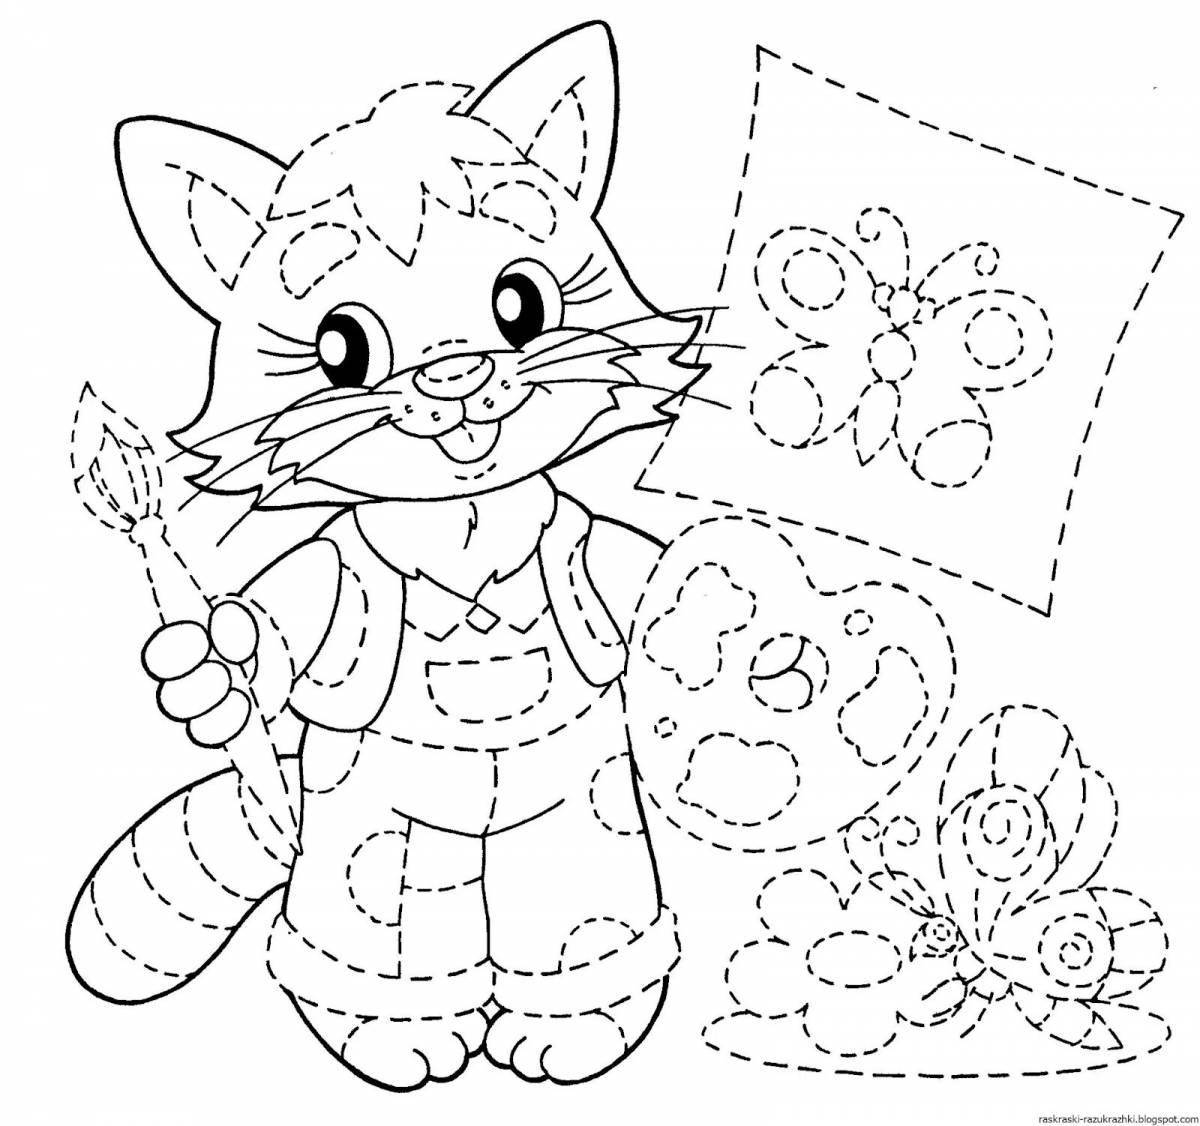 Fun coloring for girls 5-6 years old